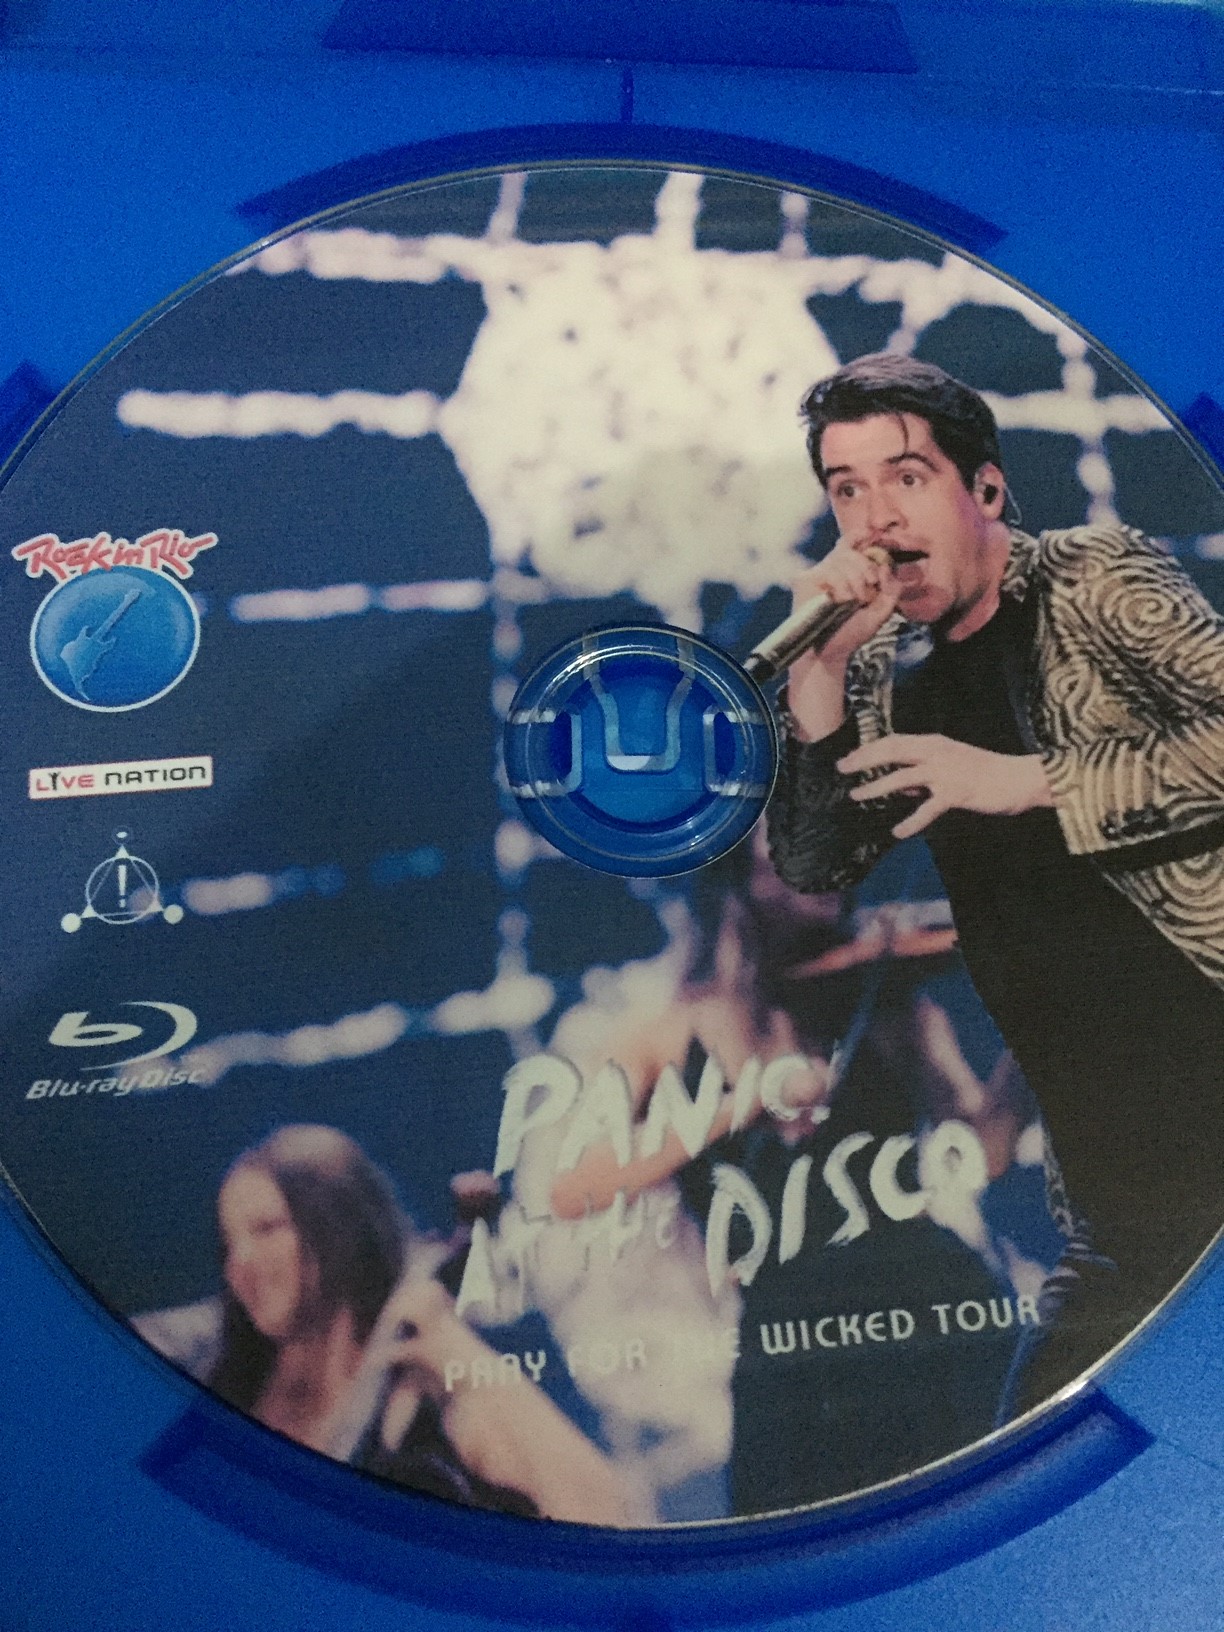 Bluray panic at the disco pray for the wiched tour rock in rio 4